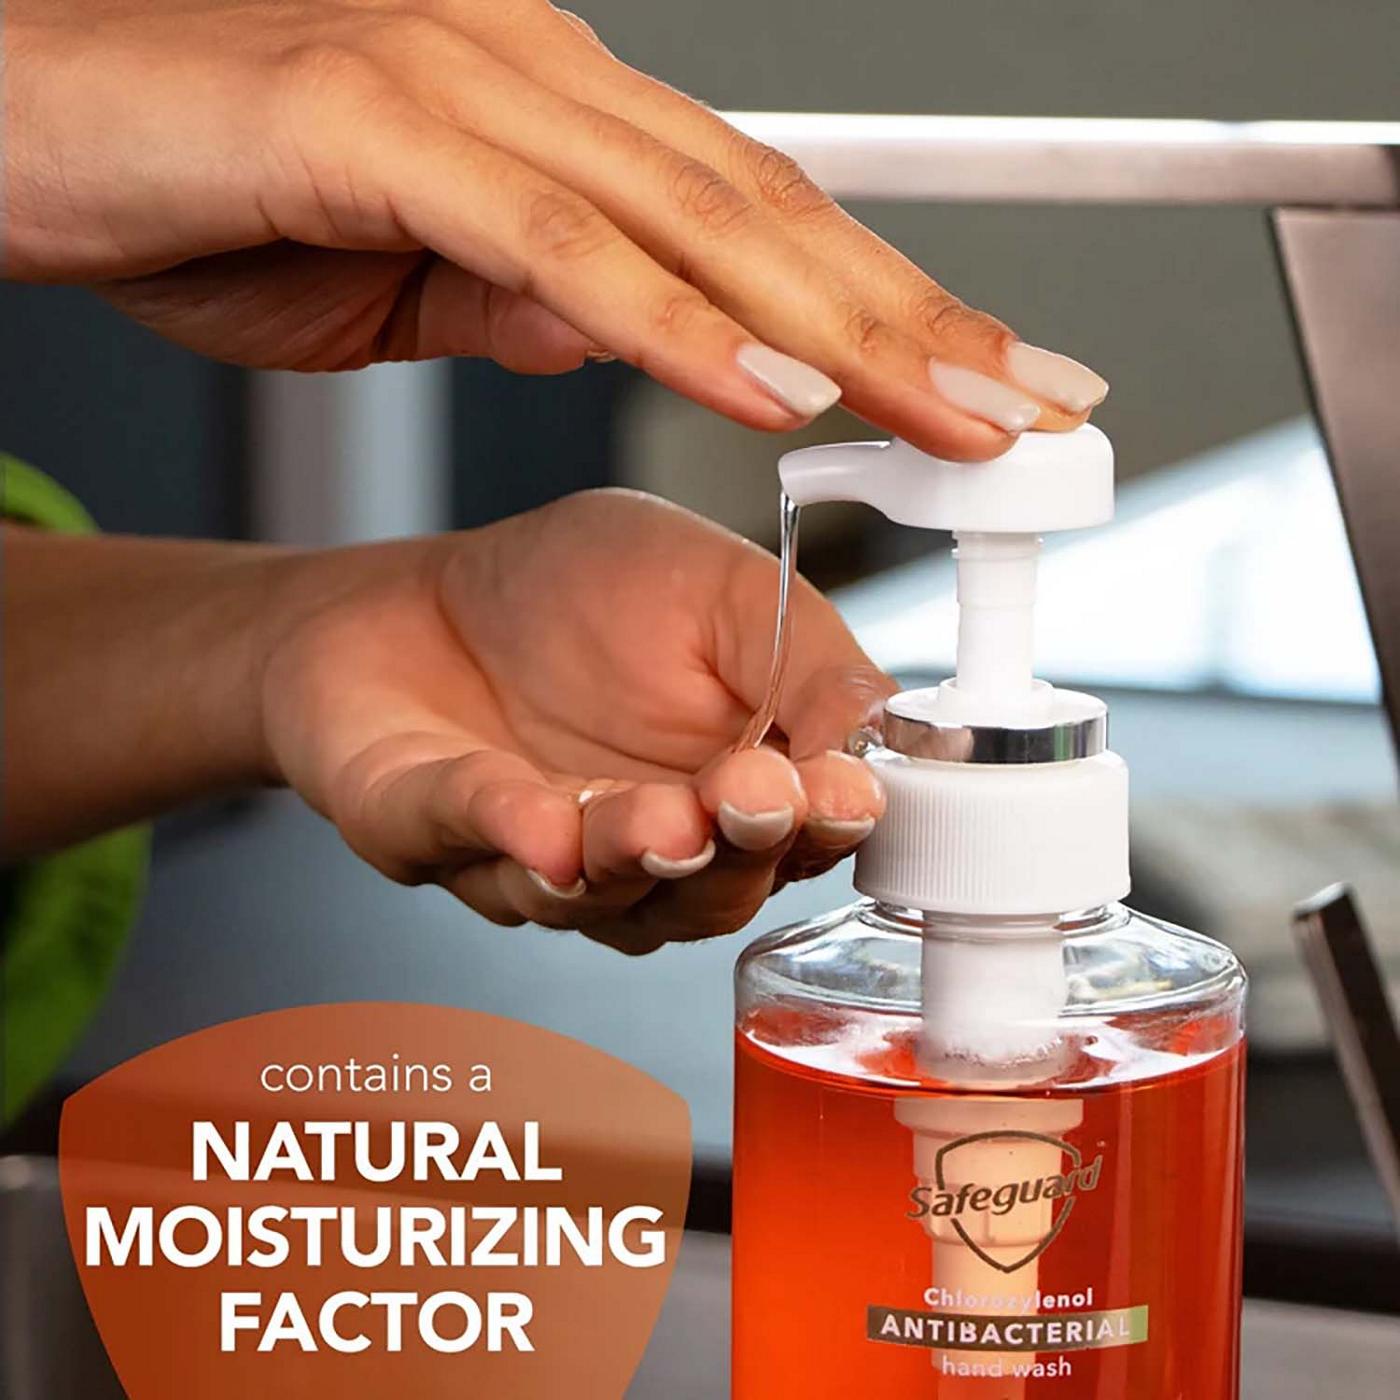 Safeguard Antibacterial Hand Soap - Notes Of Peach; image 4 of 6